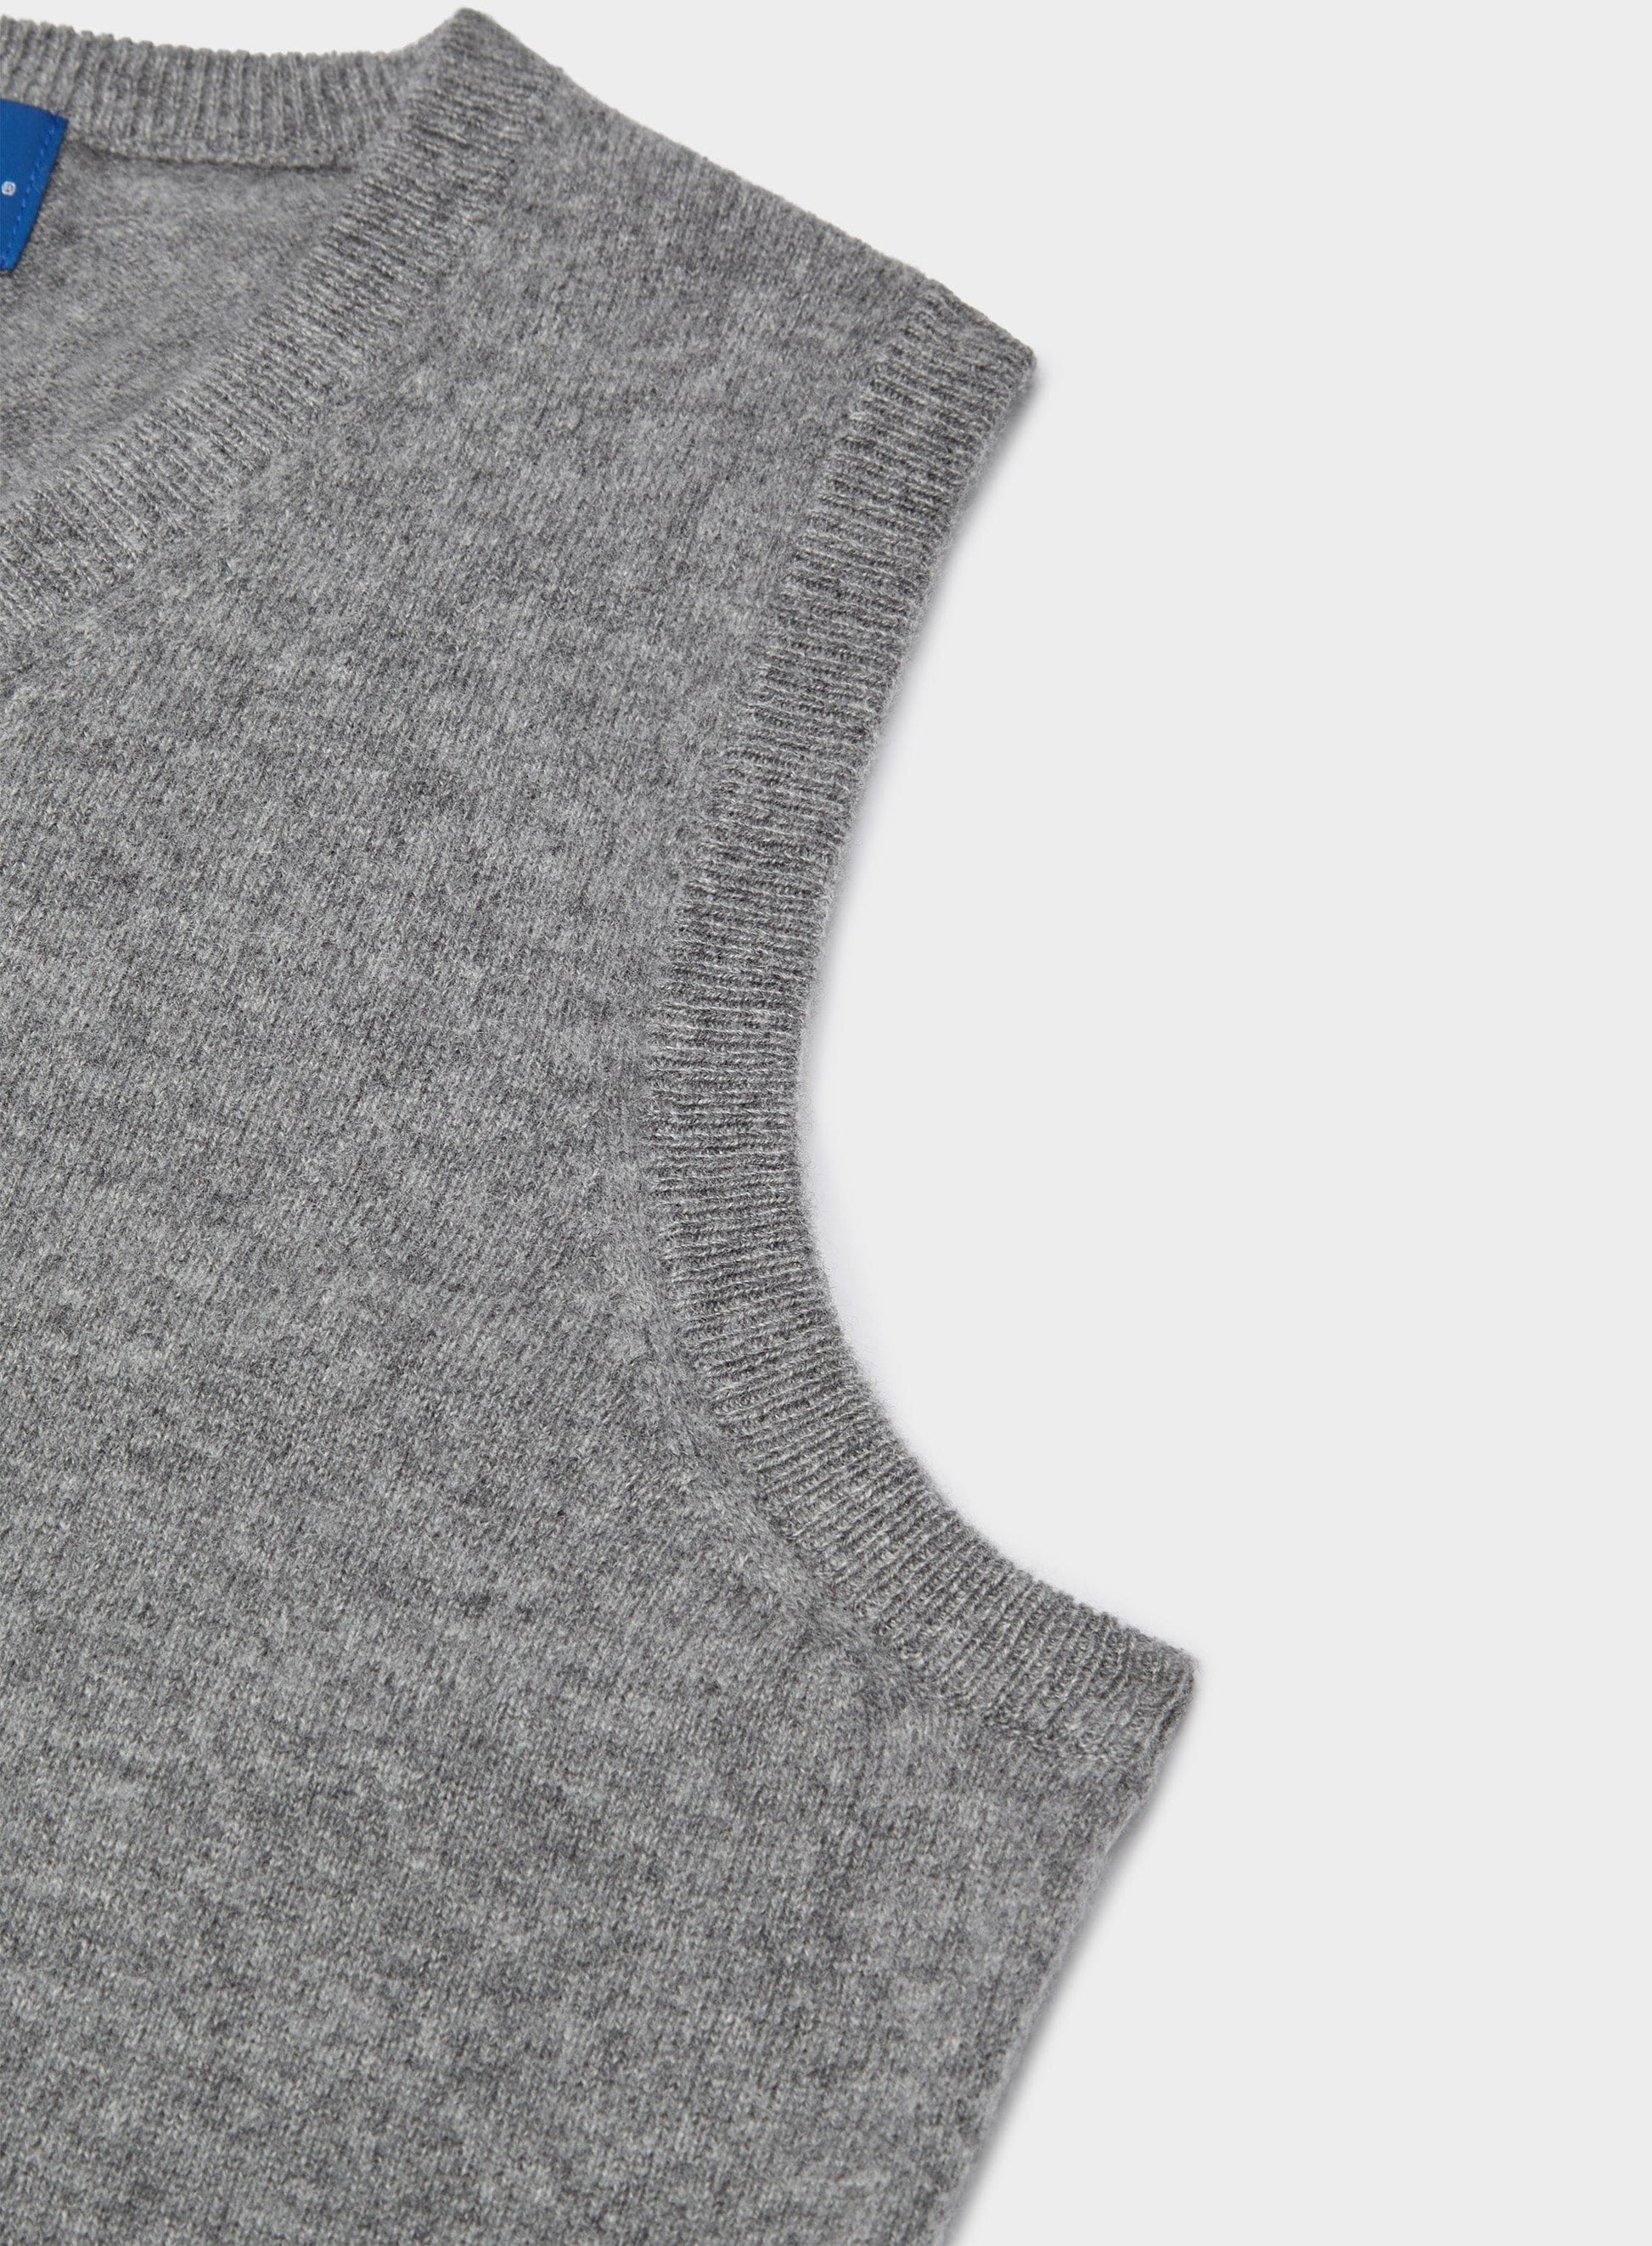 Cashmere Sleeveless in Mid Grey